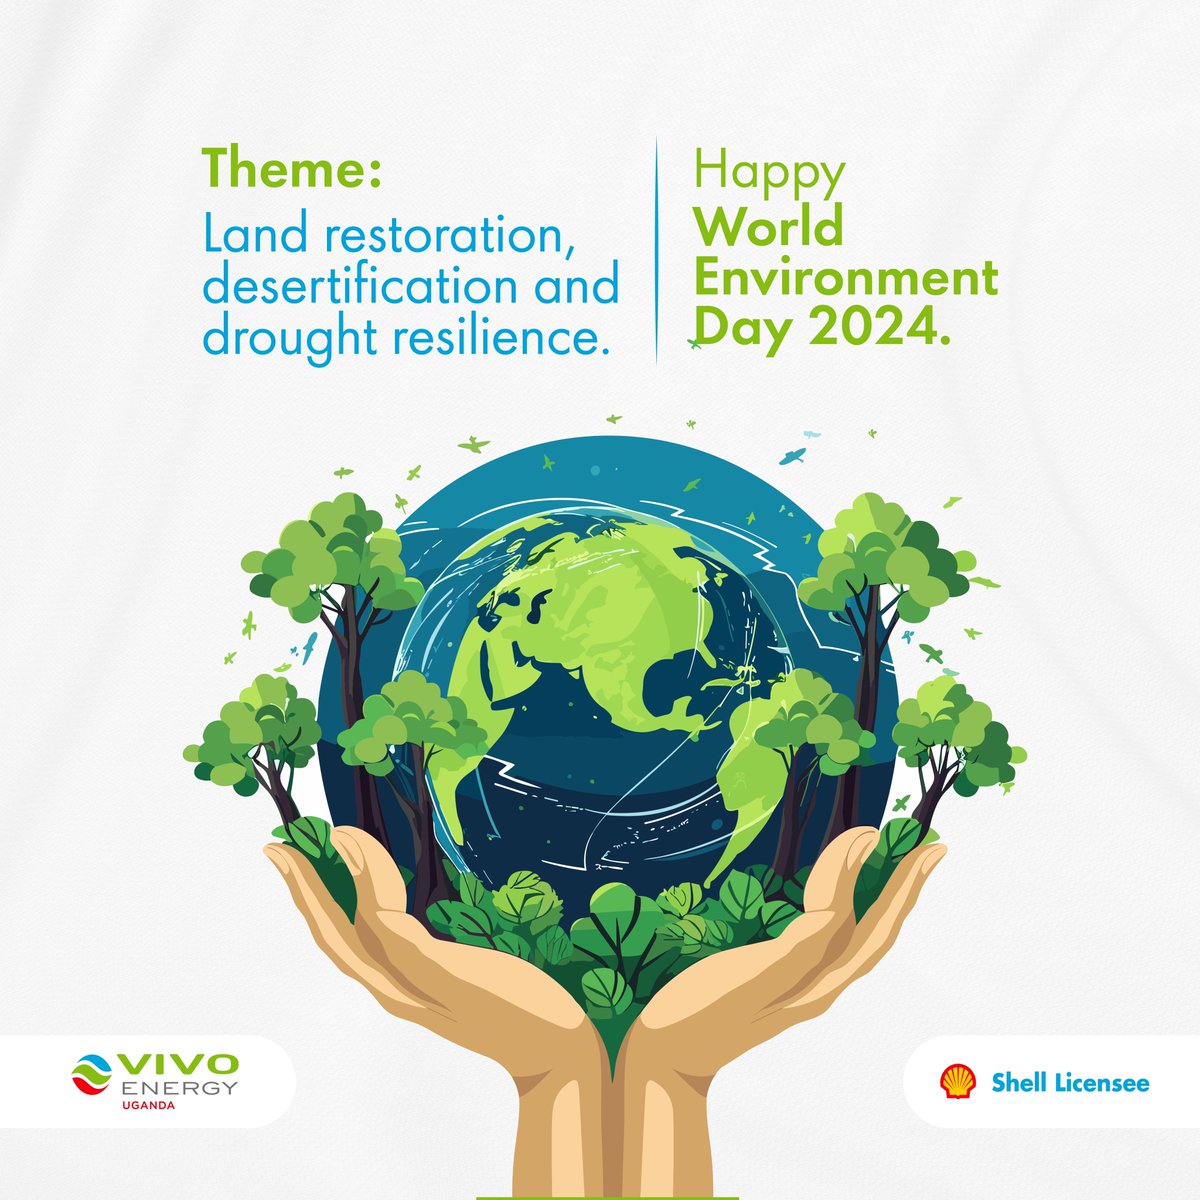 As we celebrate World Environment Day, let’s remember that we have only one earth. Let's commit to protecting and conserving our planet for future generations. Happy World Environment Day! #OurLandOurFuture